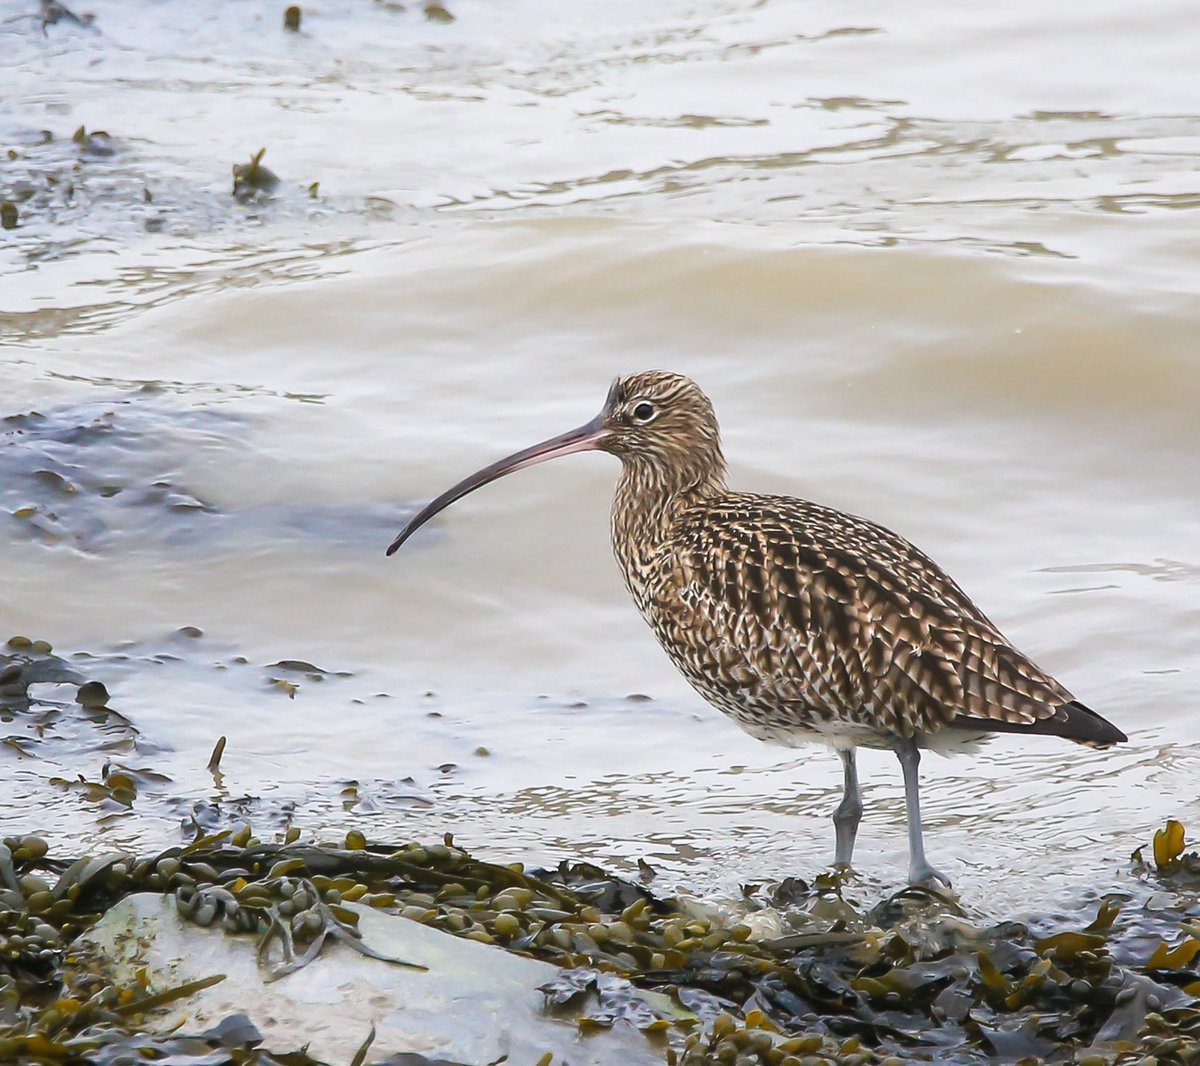 One of my fav birds..the Curlew..foraging for food amongst the seaweed today. #curlew #britishbirds #britishwildlife #wadingbirds #BirdsOfTwitter #camelestuary #cornwall #TwitterNatureCommunity #TwitterNaturePhotography #wildlifephotography #birdphotography #birdwatching